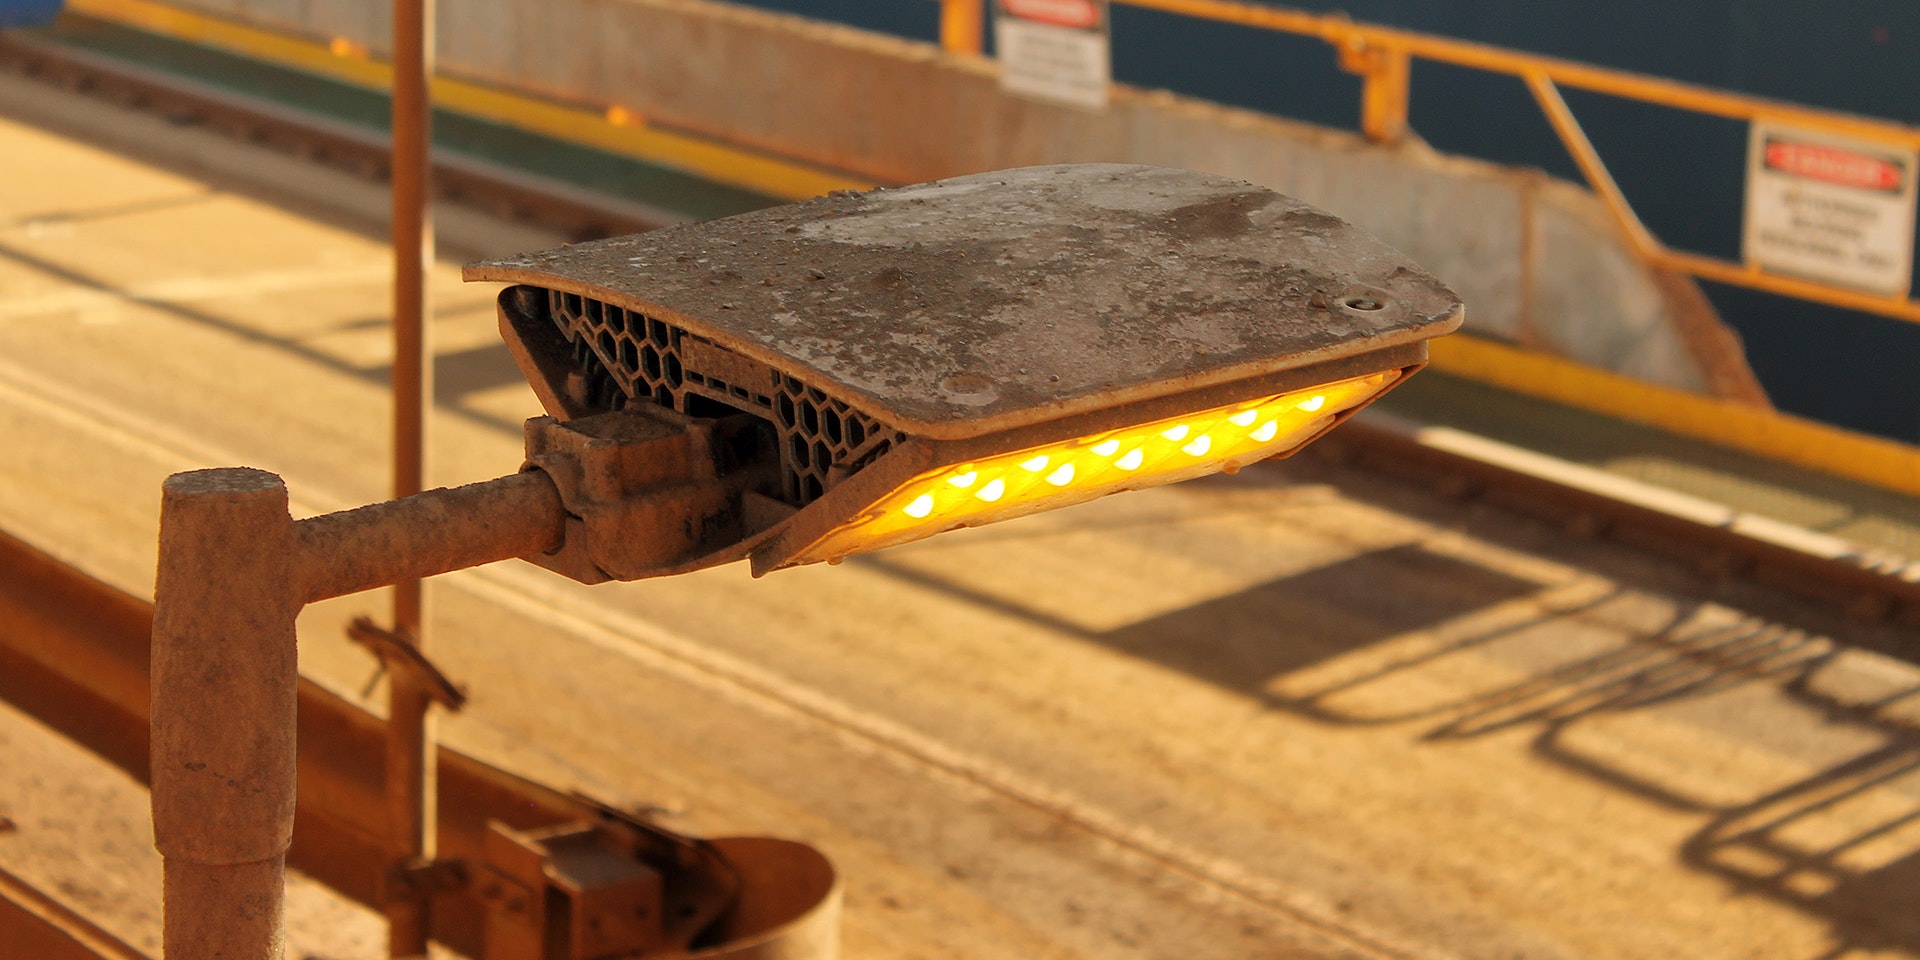 DLK LED Conveyor / Area Light in application, installed on a conveyor on an iron ore mine in bulk port, close up photo